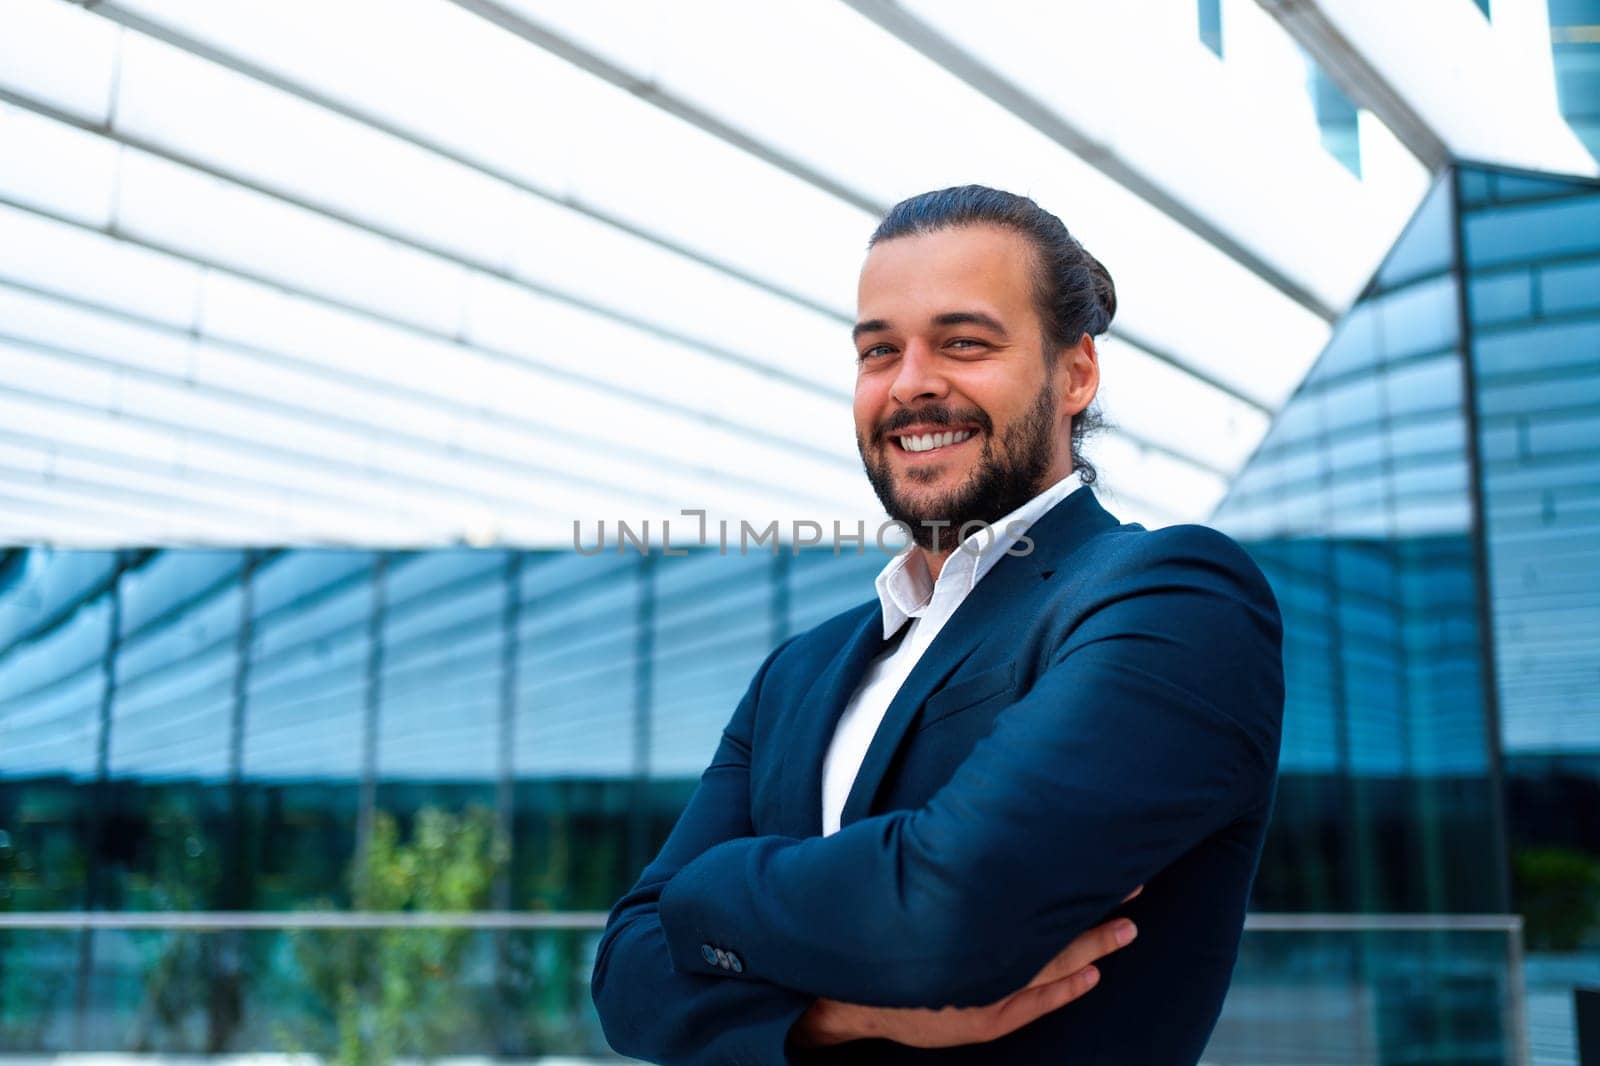 Confidence successful businessman or worker in suit with beard standing in front office glass building arm crossed looking at camera and smile. Hispanic male business person side view portrait.